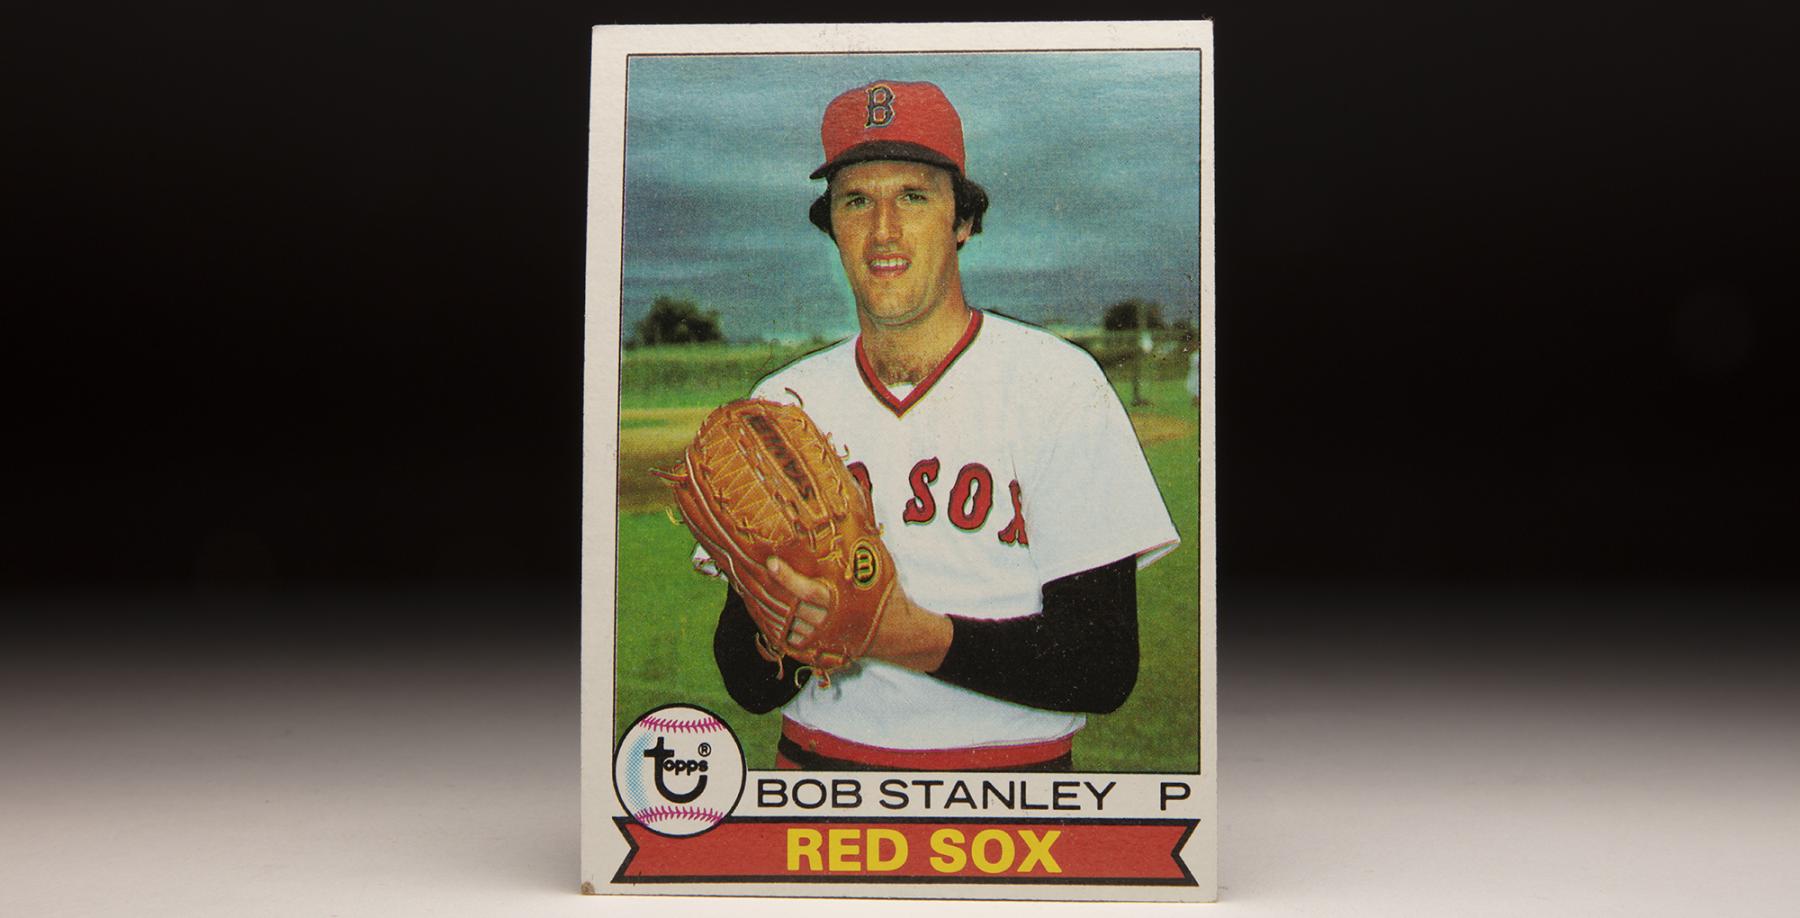 https://baseballhall.org/sites/default/files/styles/header_image_1800_w/public/Front%20of%20Stanley%20card.jpg?itok=9qSU3x-8